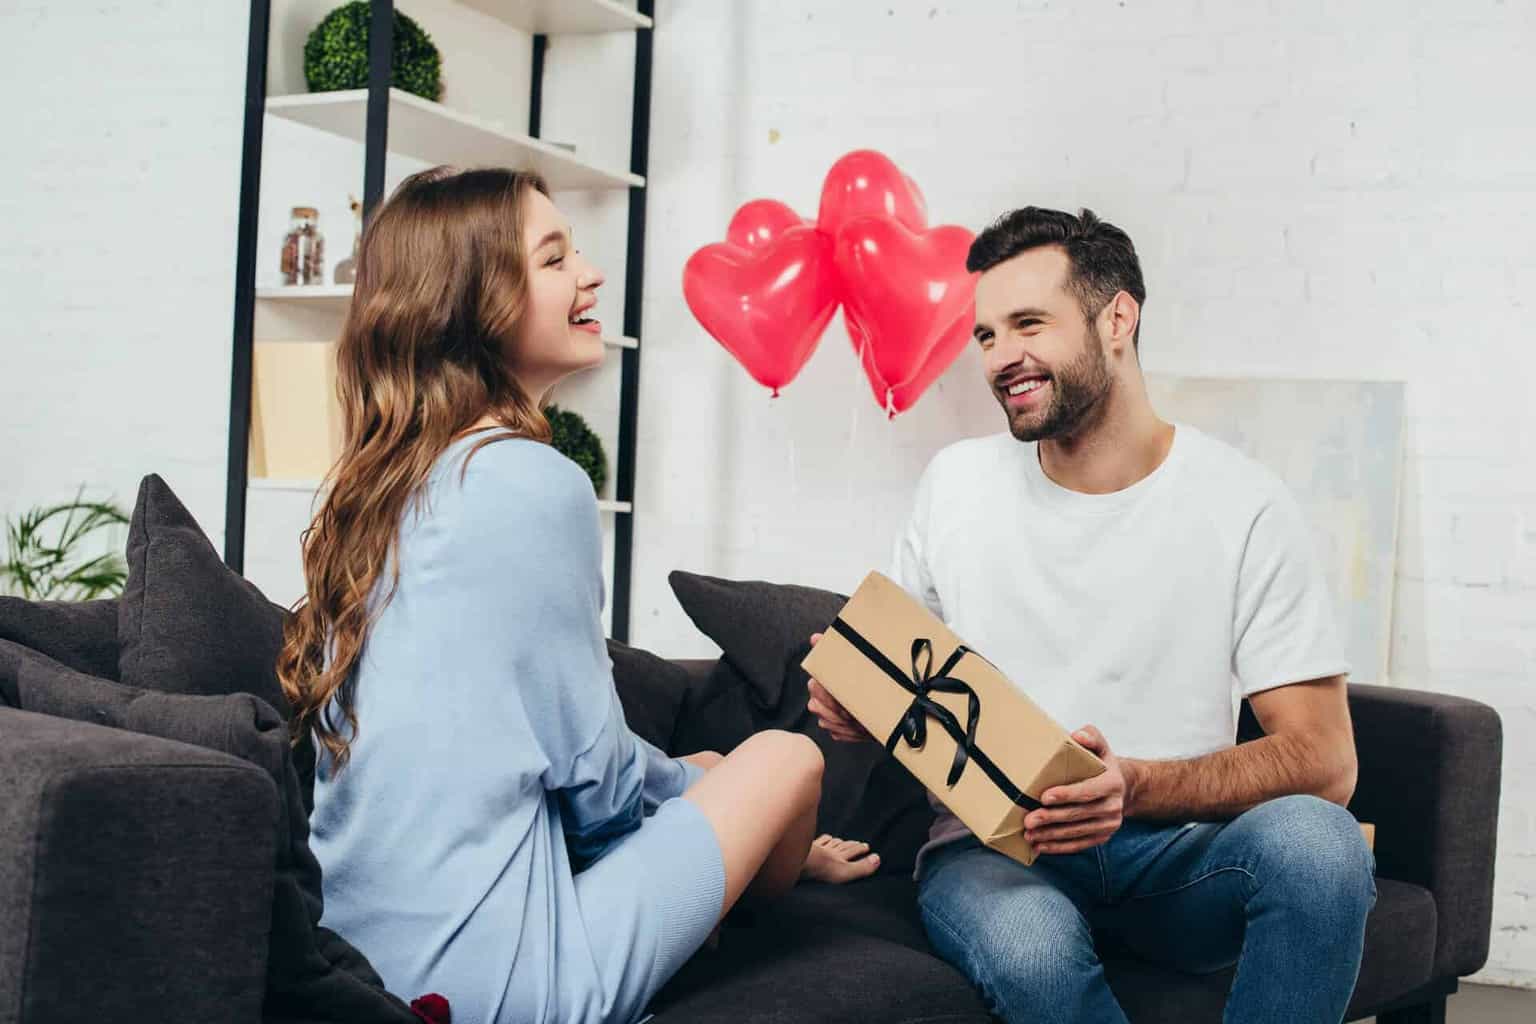 10 best gift ideas for your girlfriend - Amazing Viral News